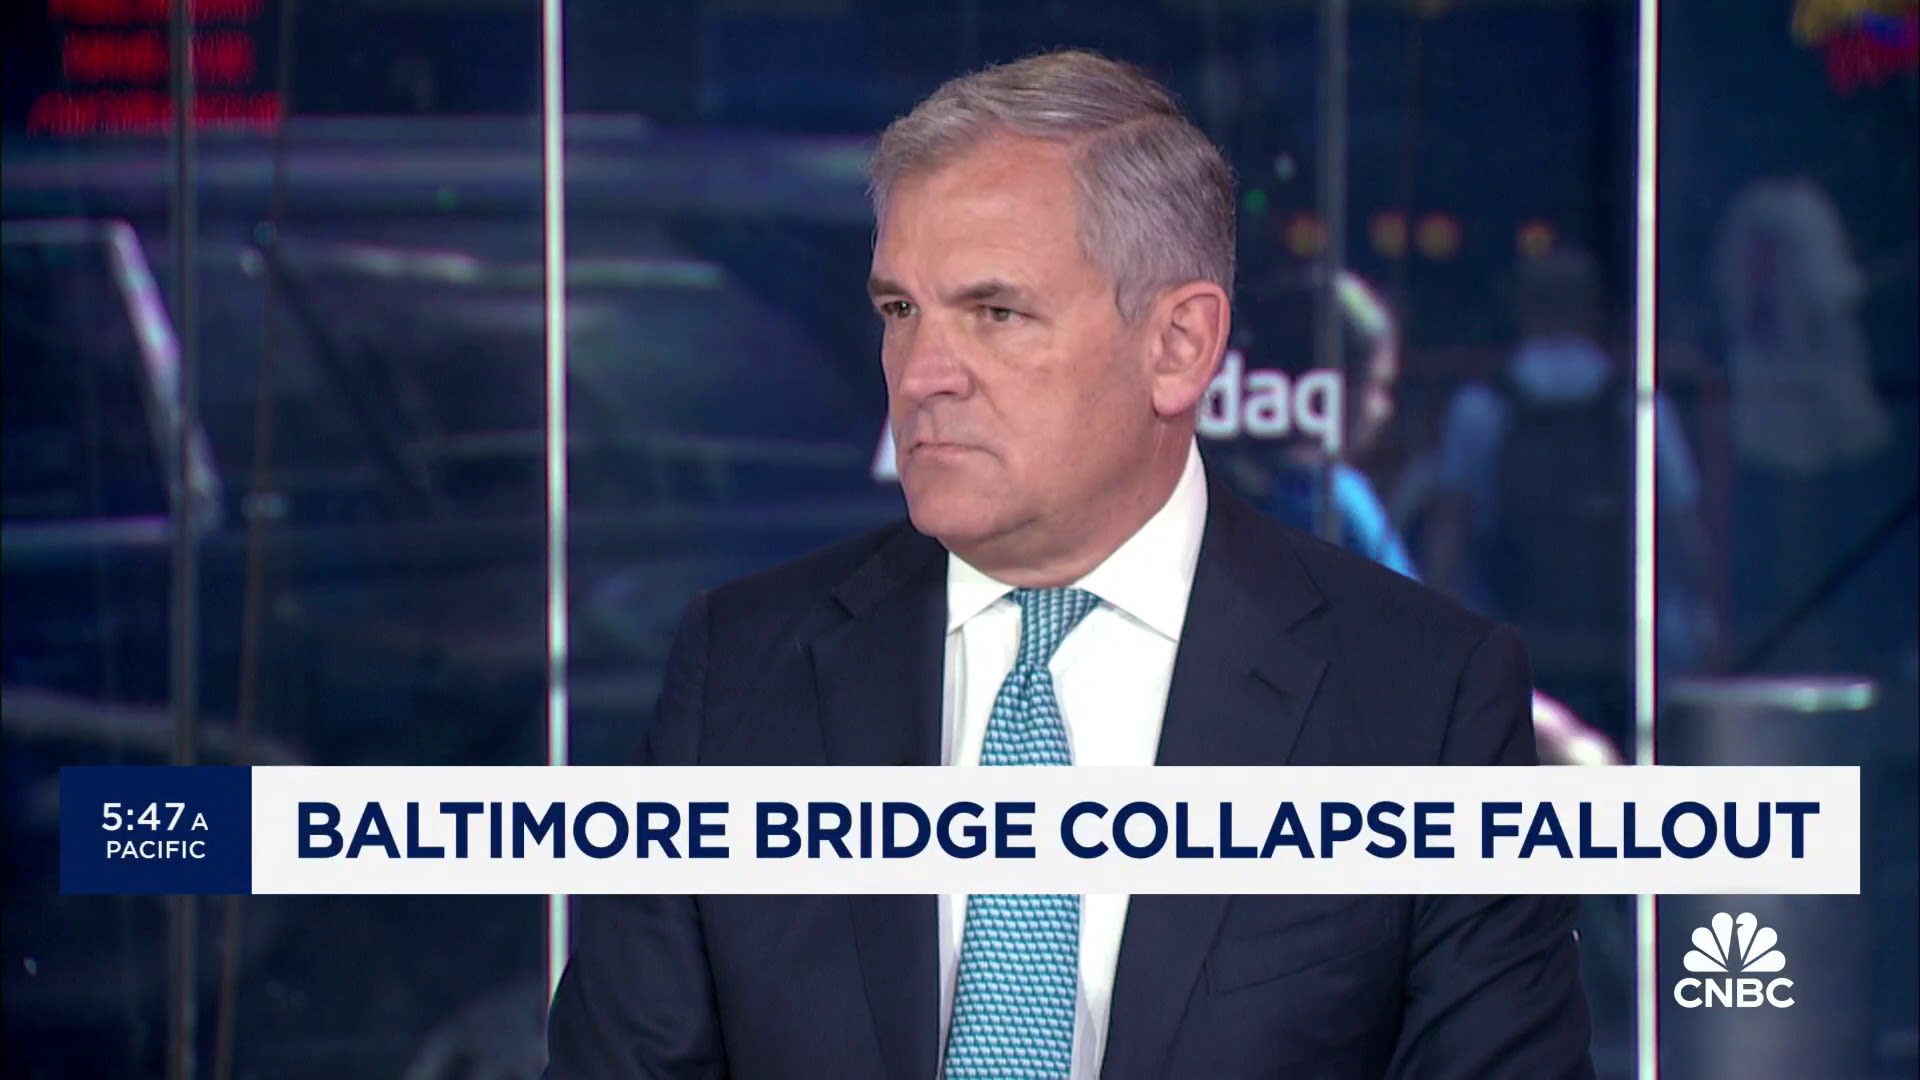 Baltimore bridge collapse: Why the loss is 'manageable' for the insurance industry